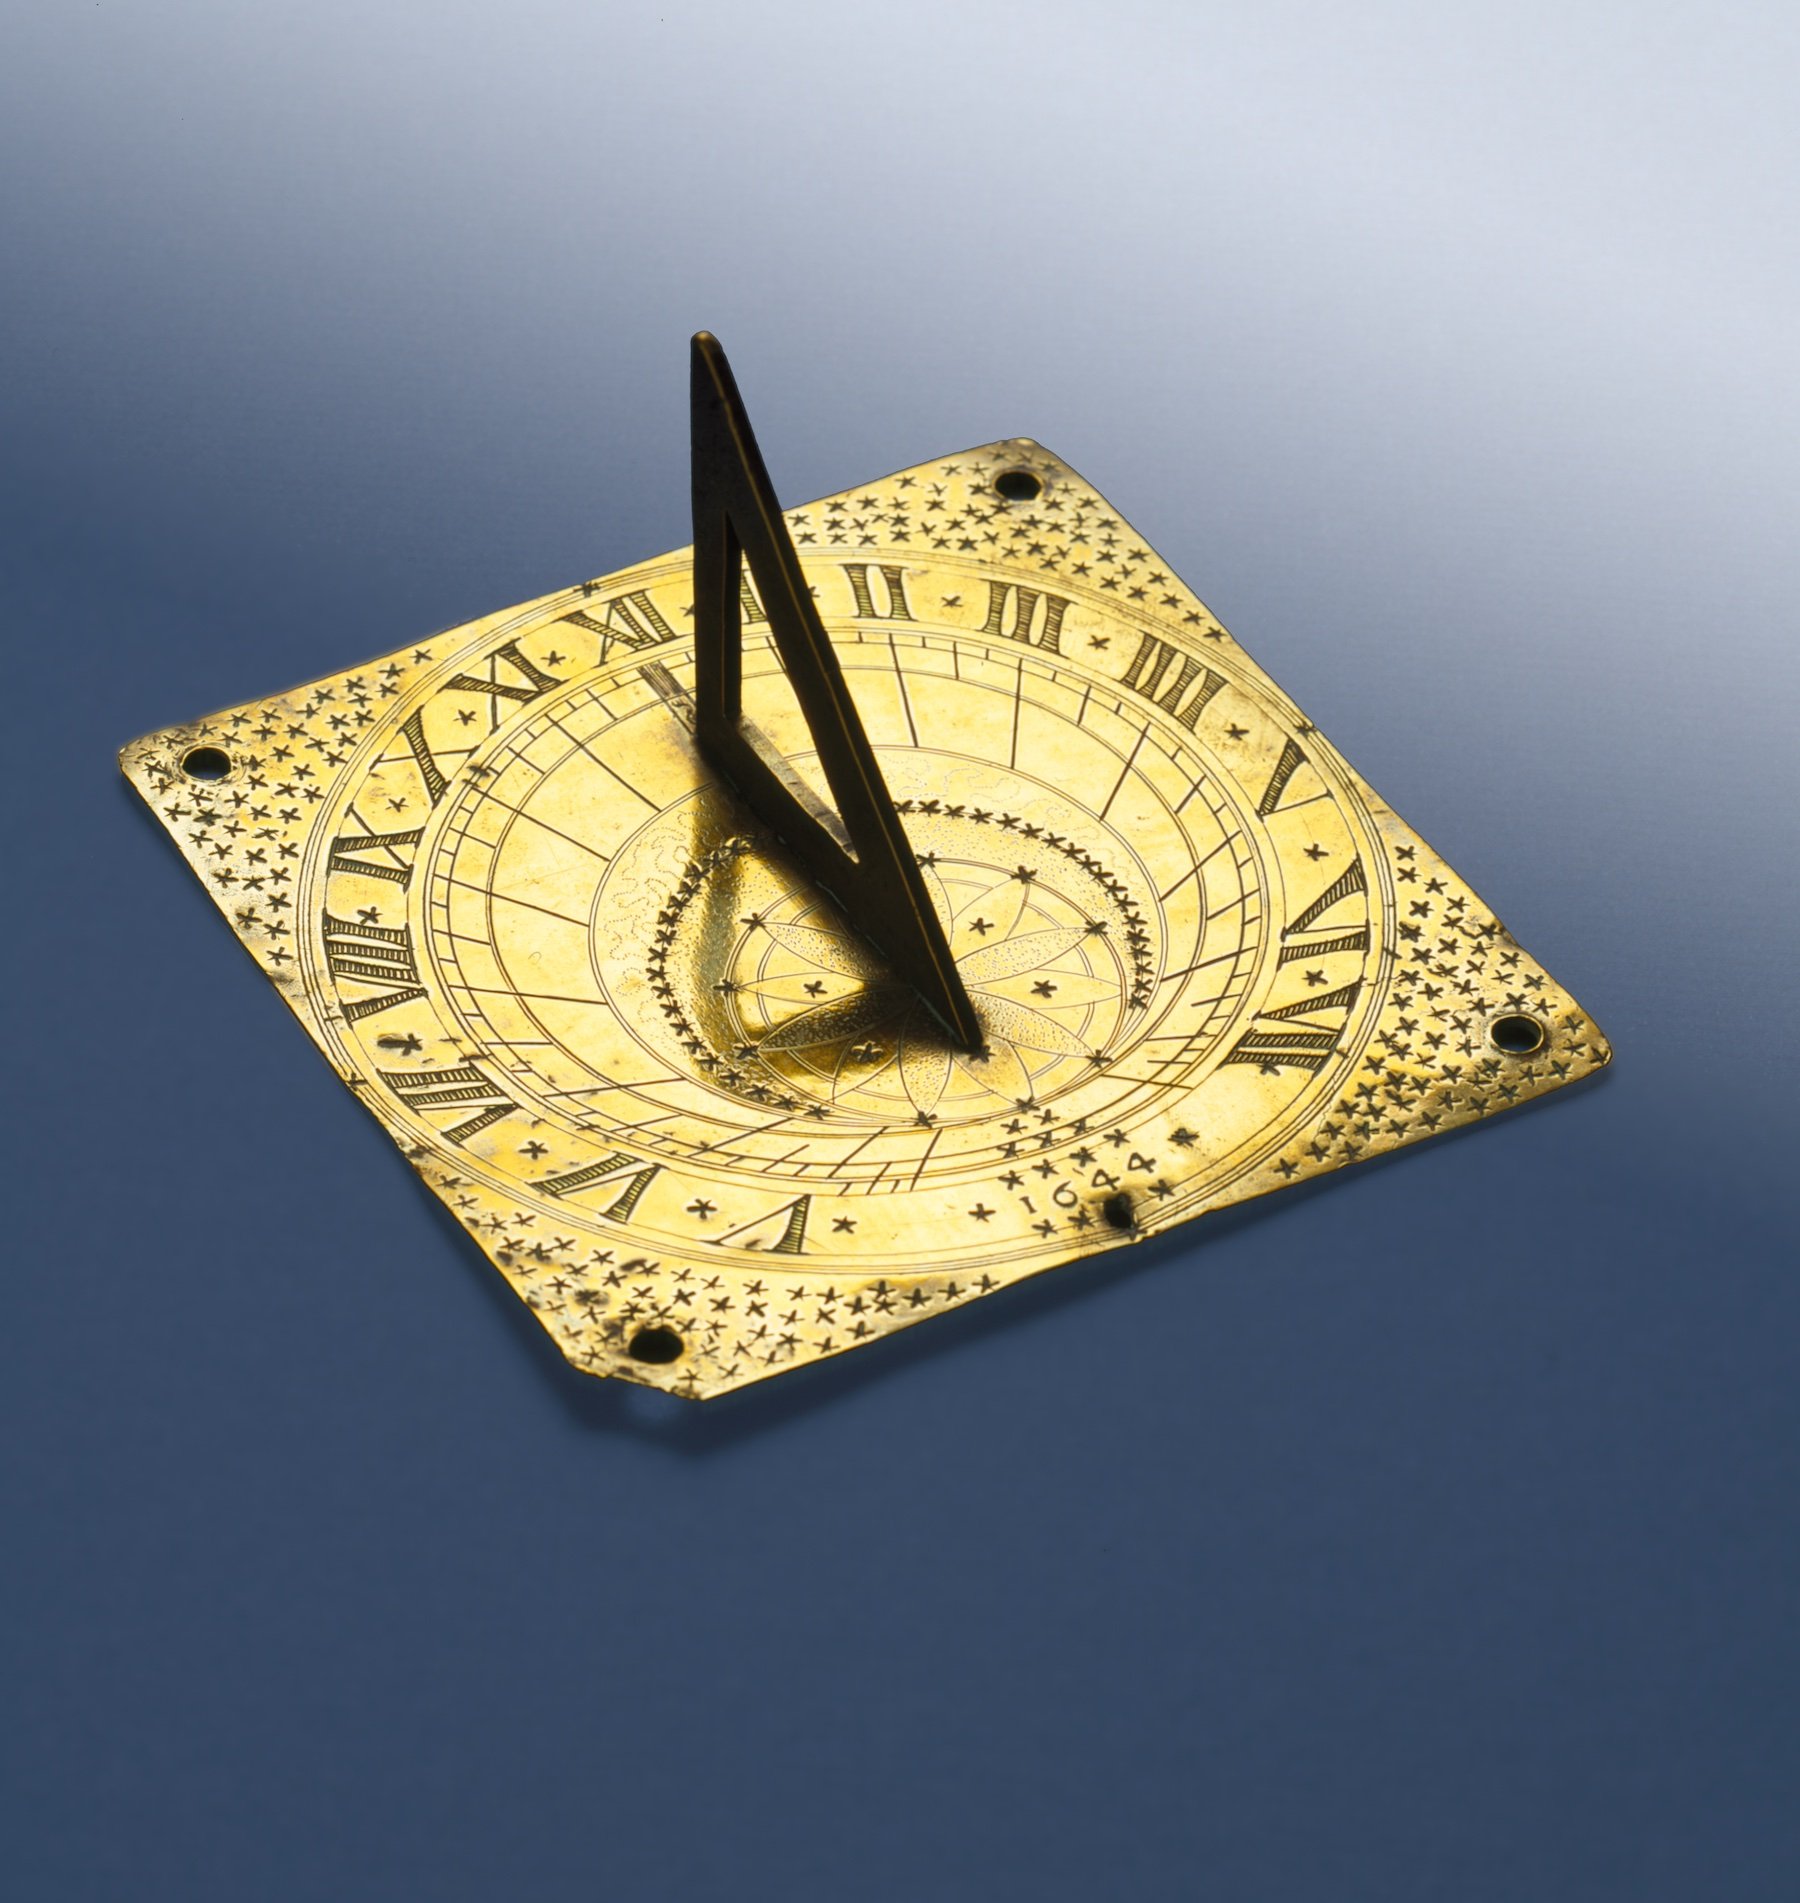 Brass Sundial, Dated 1644, Owned by John Proctor.